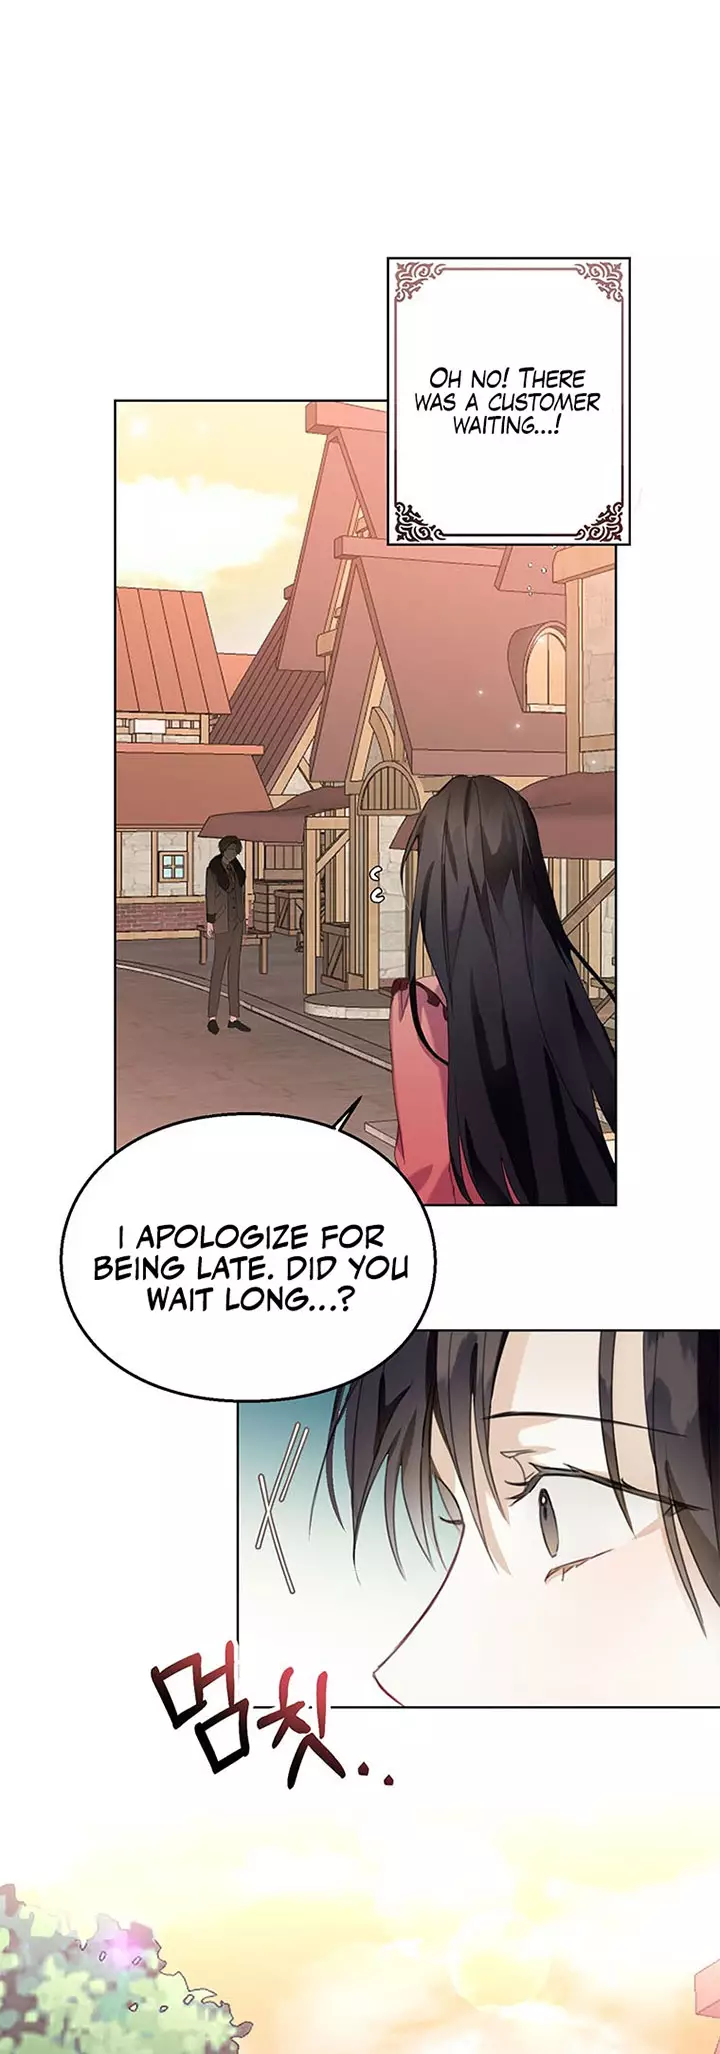 The Bad Ending Of The Otome Game - 7 page 7-c7915f94